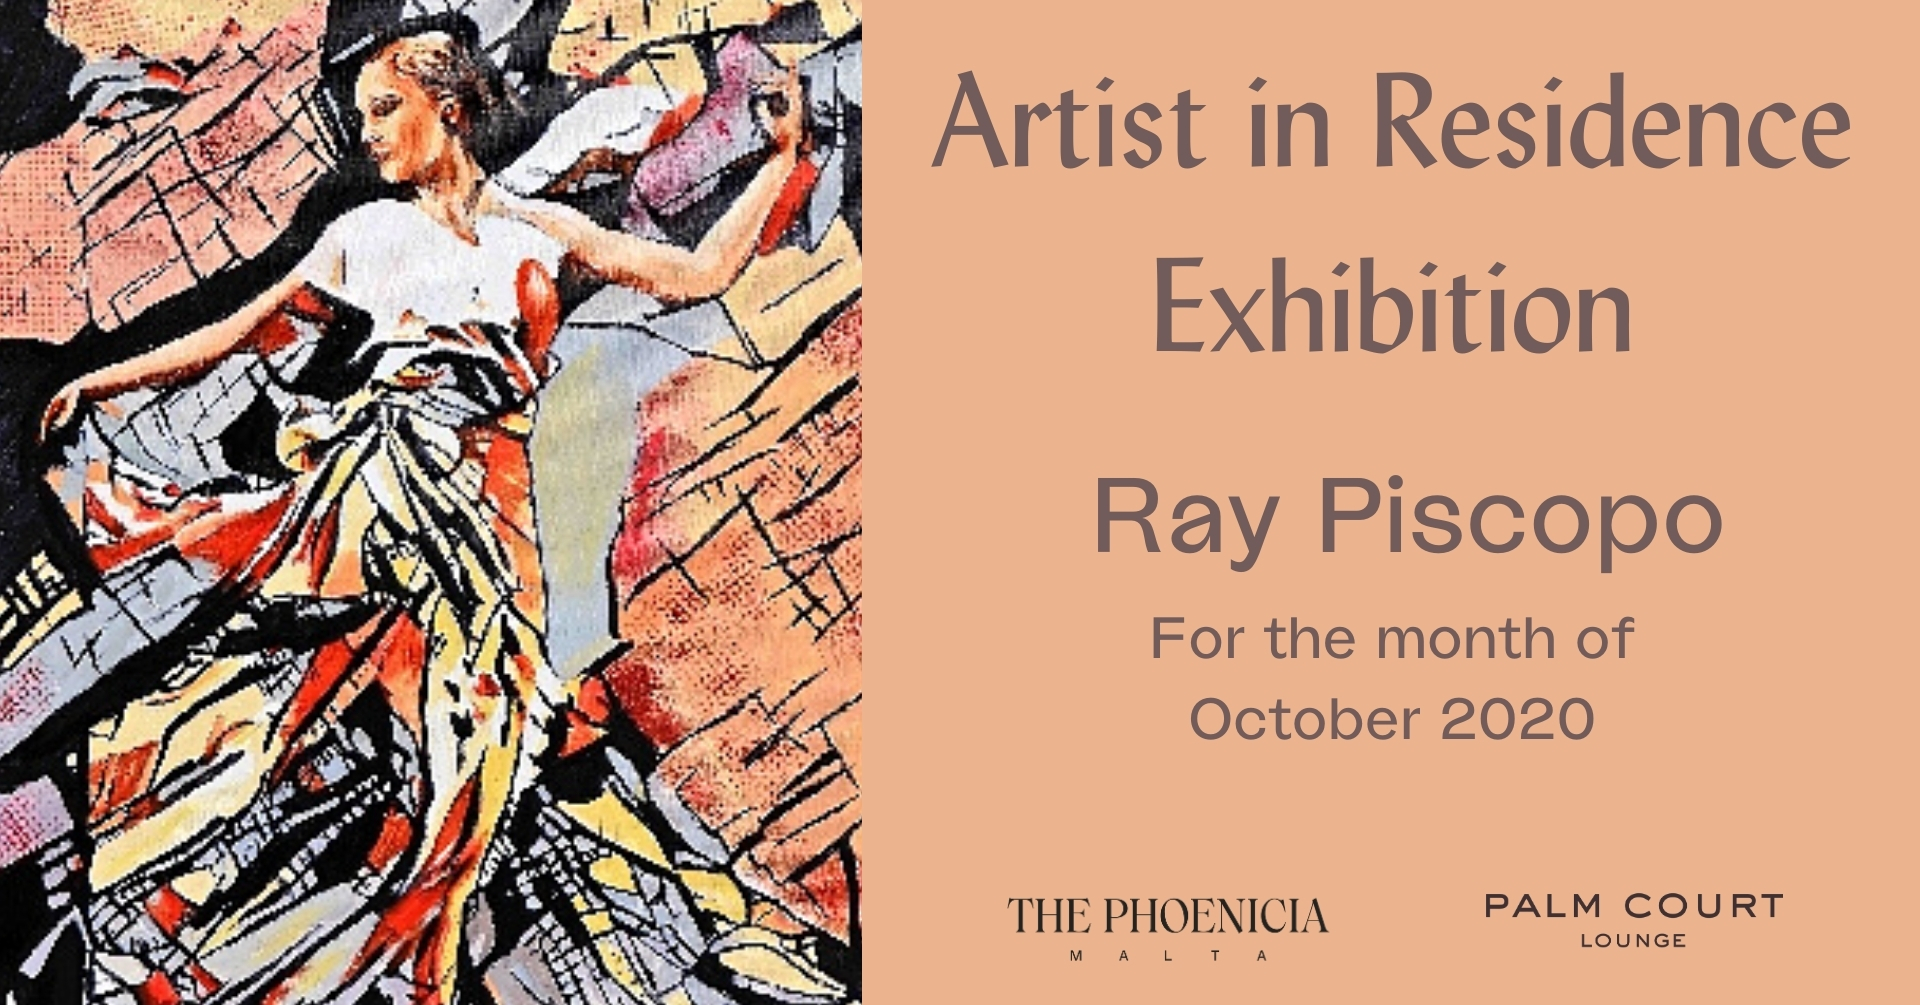 Artist in Residence Exhibition by Ray Piscopo